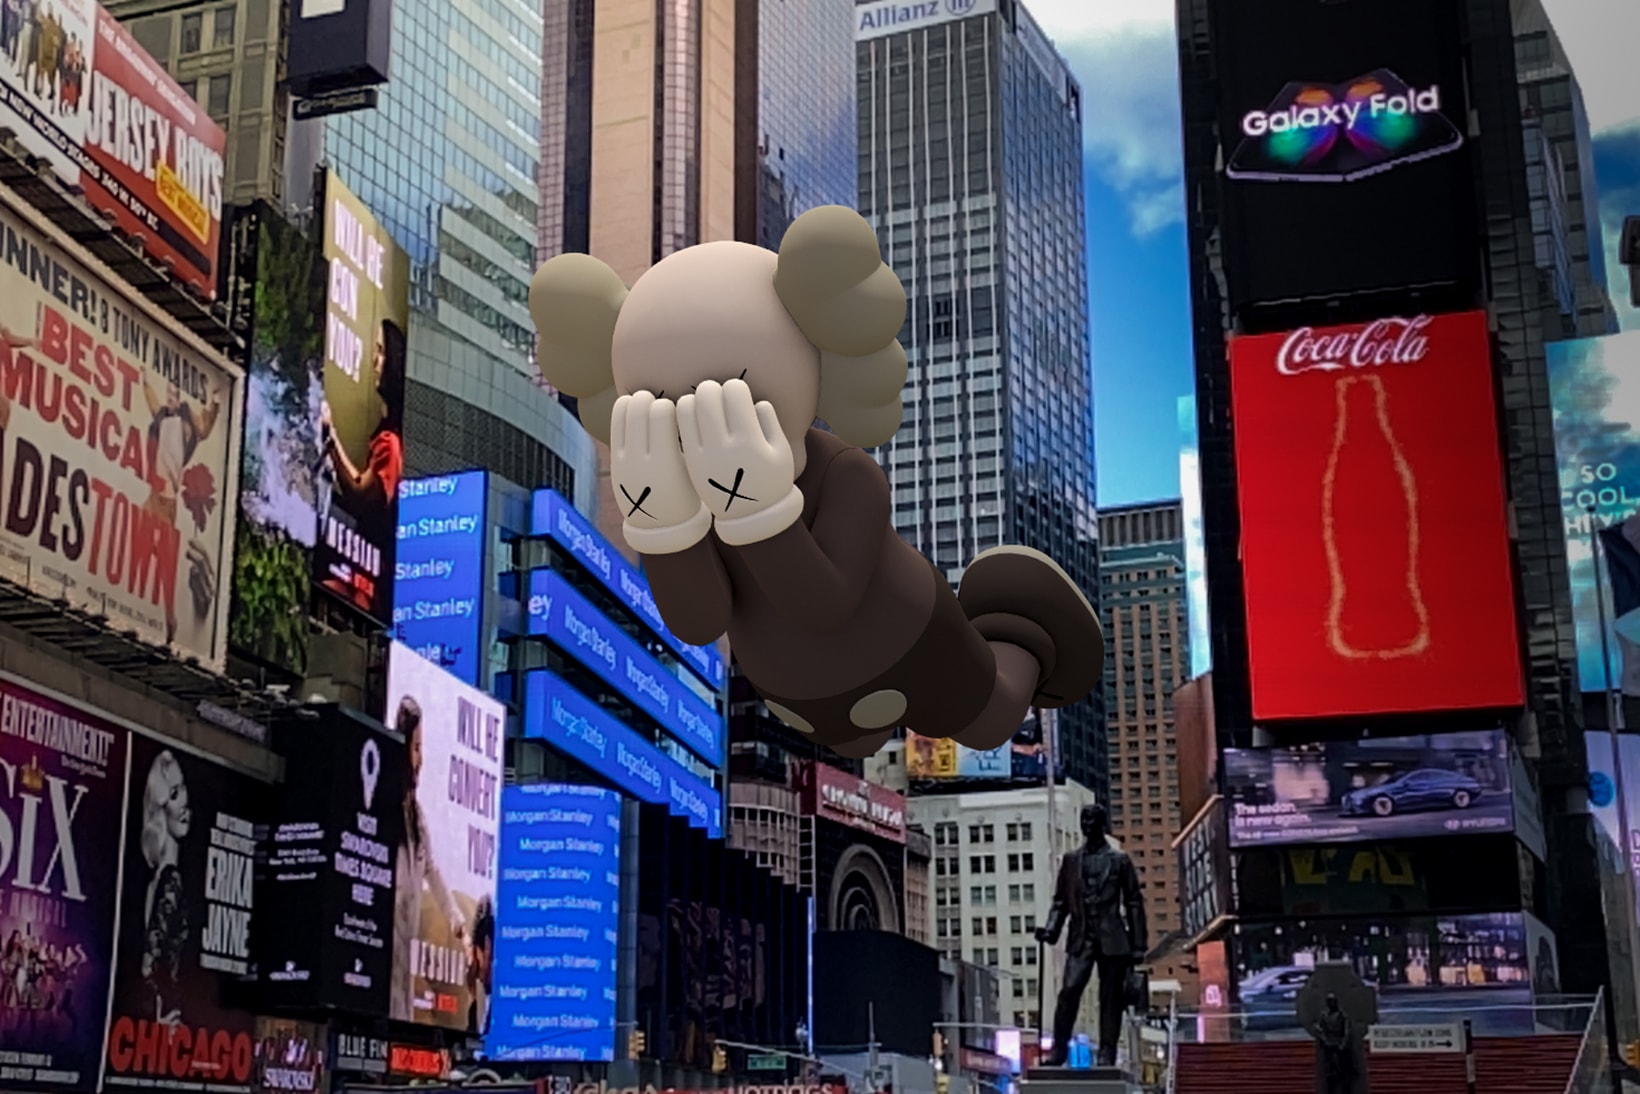 kaws companion brian donnelly acute art app collaboration expanded holiday augmented reality sculptures exhibition new york paris